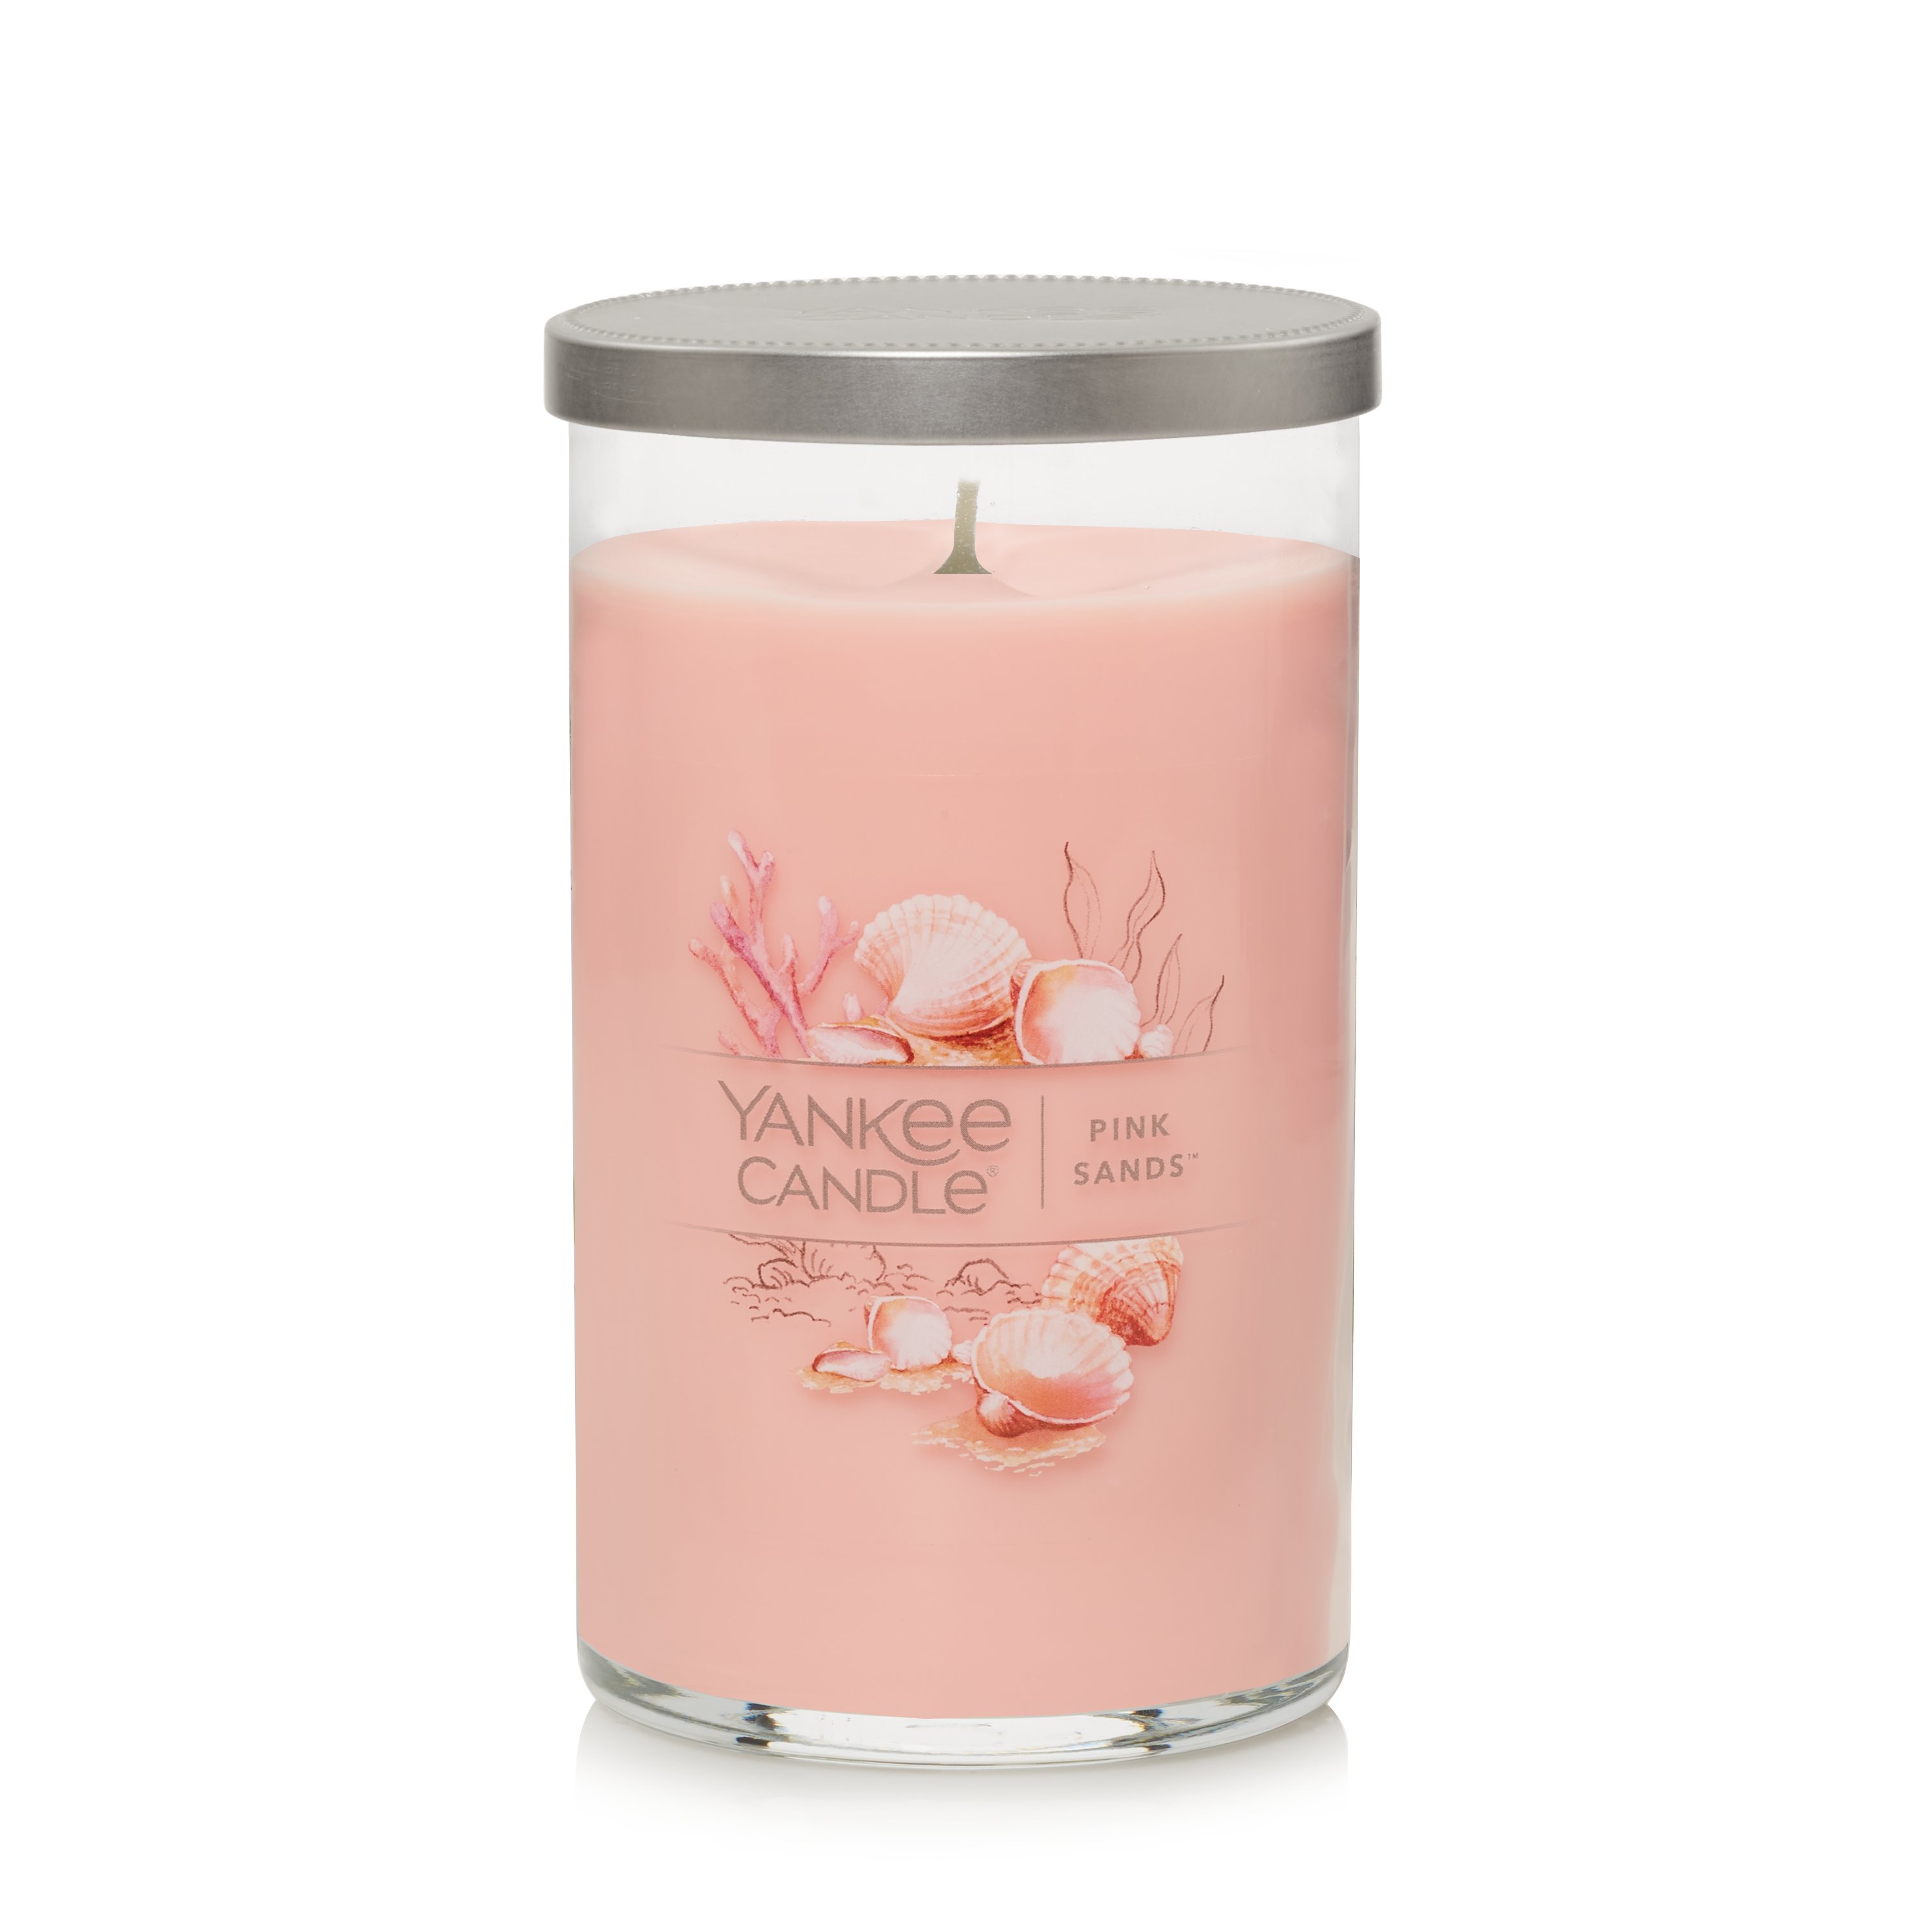 Yankee Candle Candle, Pink Sands - 1 candle, 14.25 oz